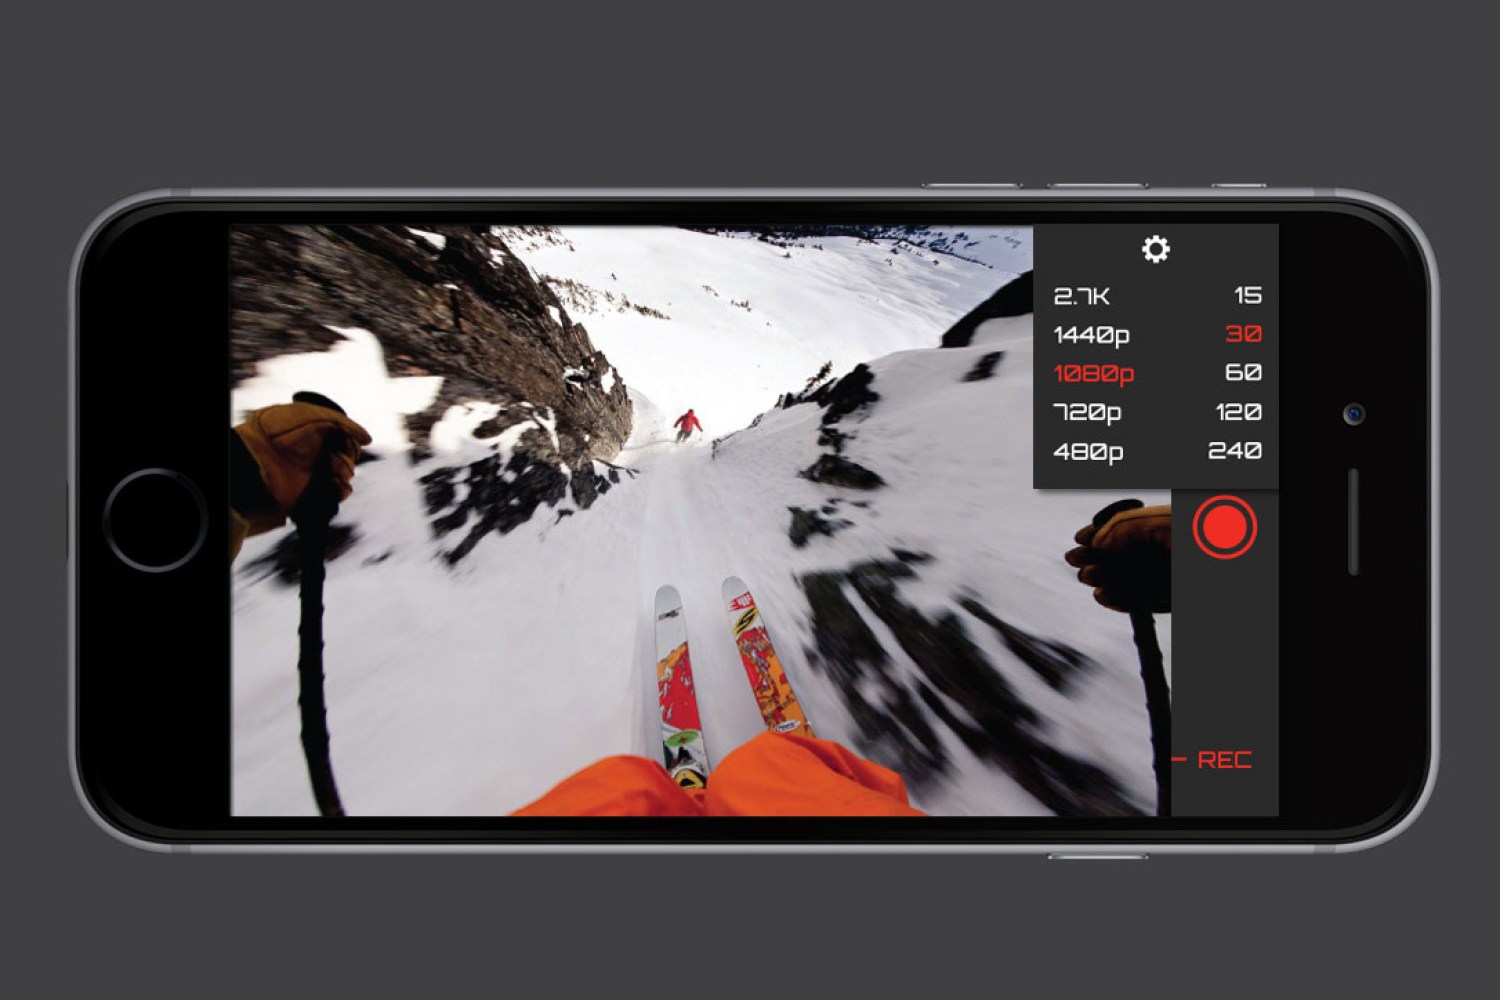 Forcite Alpine ski helmet has a camera, comms system, and other techy  features